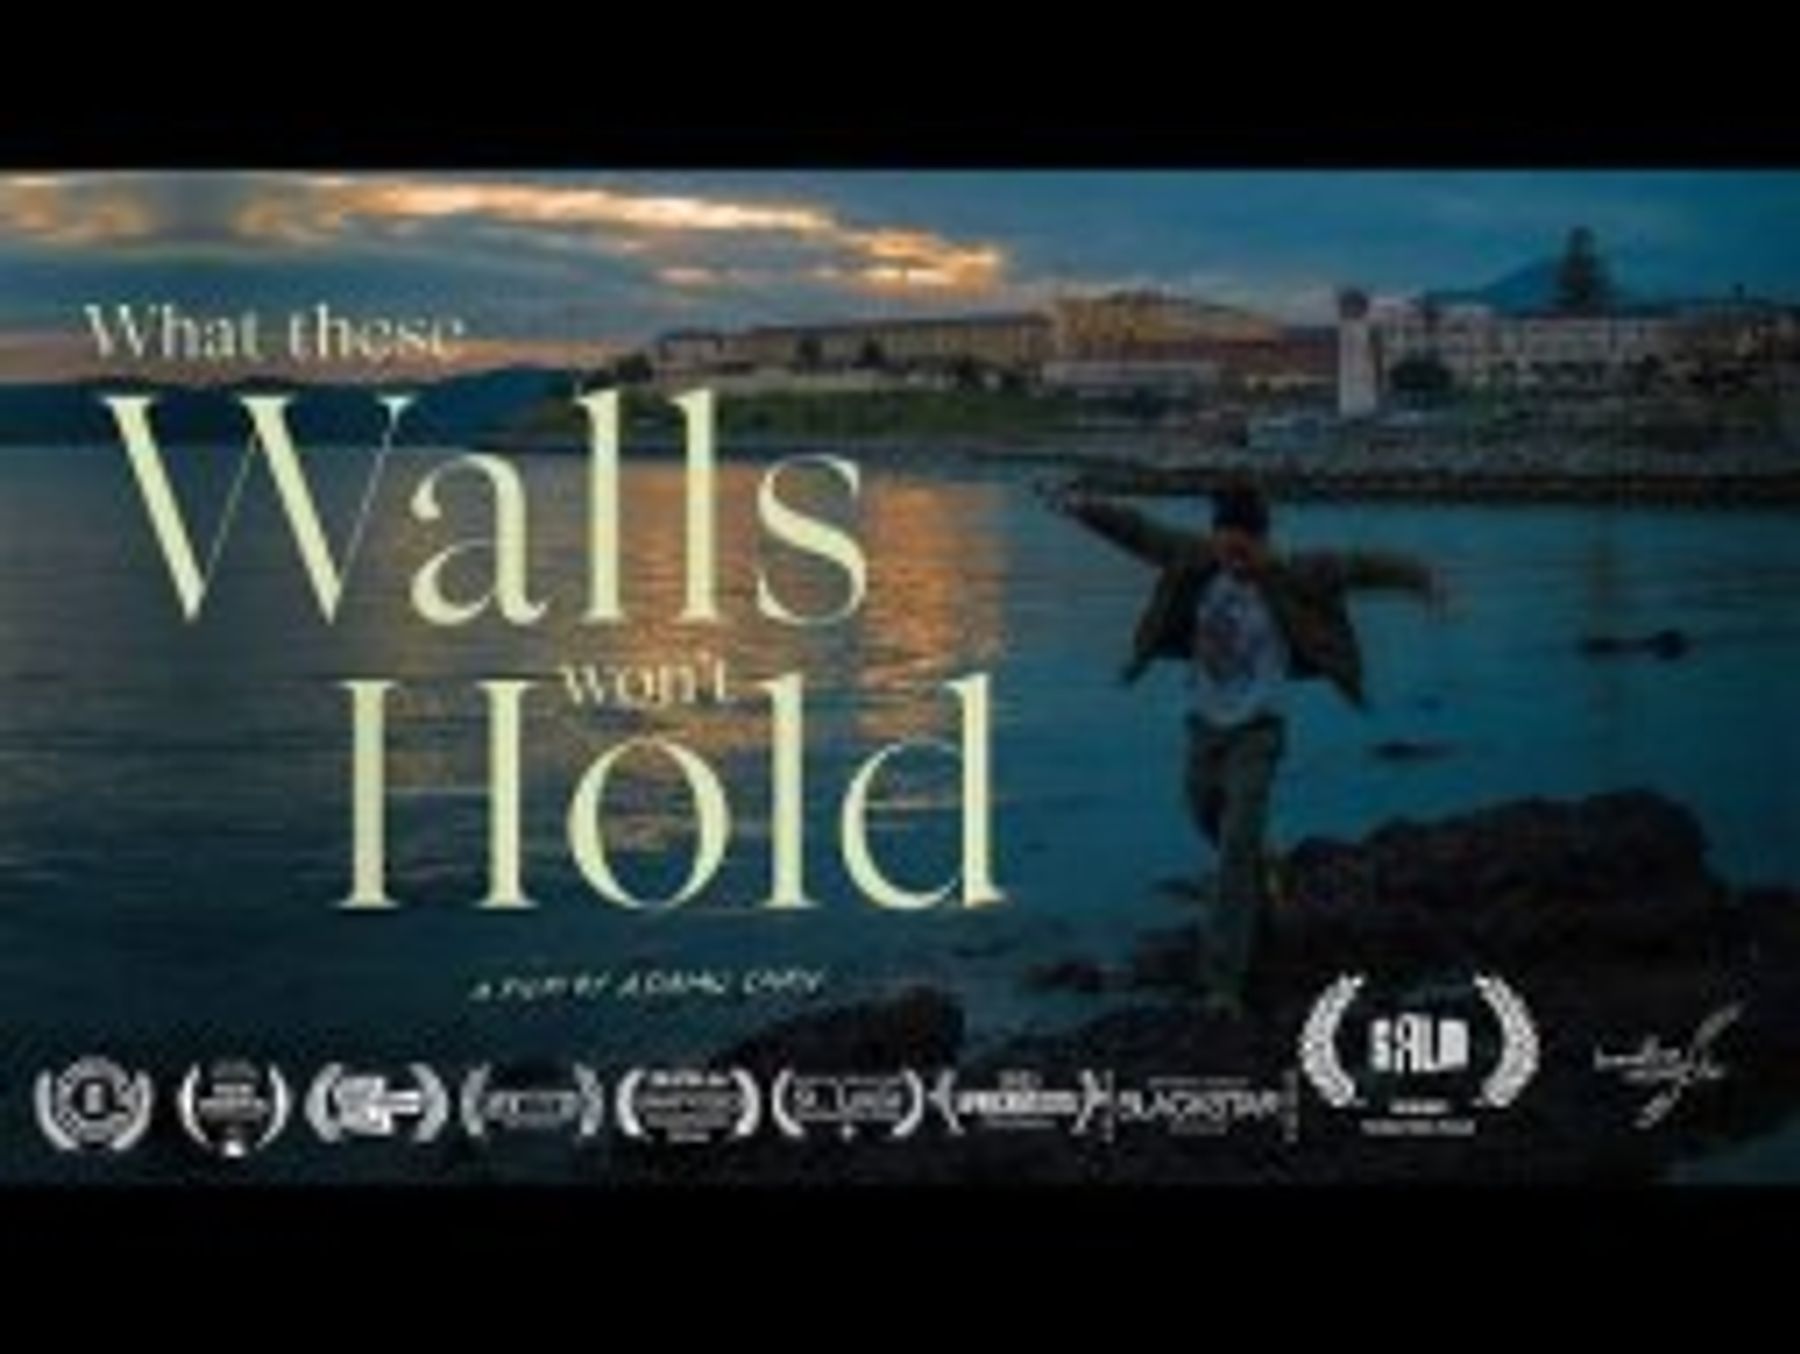 Film Screening: "What These Walls Won't Hold" - COVID in San Quentin Prison | Downtown San Francisco